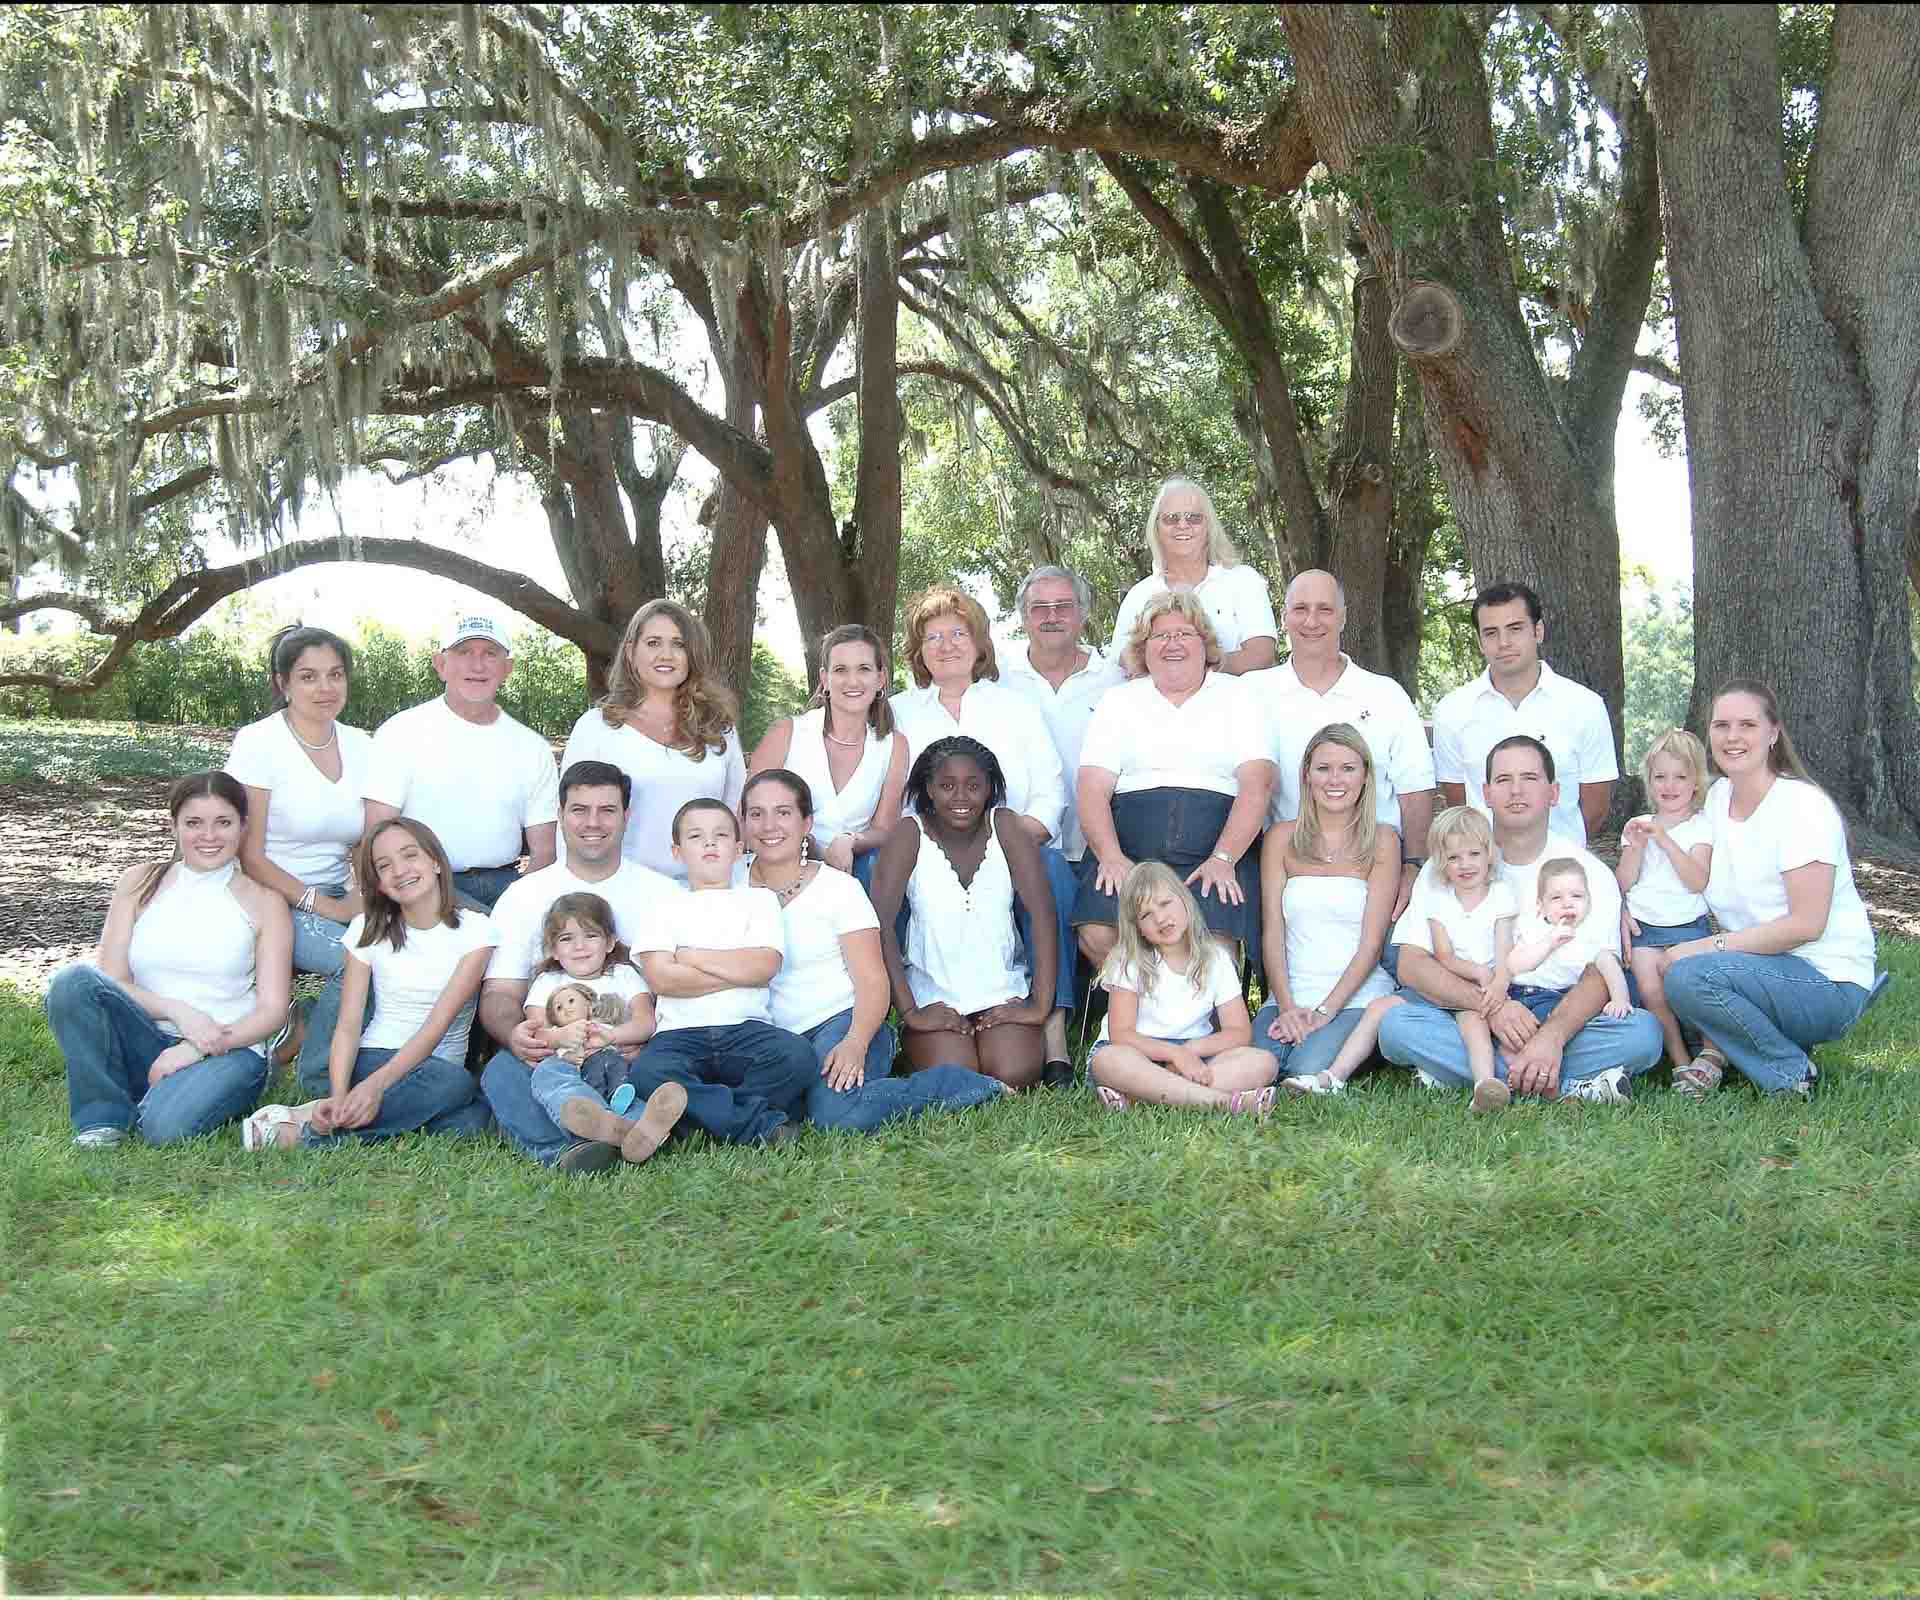 Large family portrait with 24 members all in white shirts under oak trees